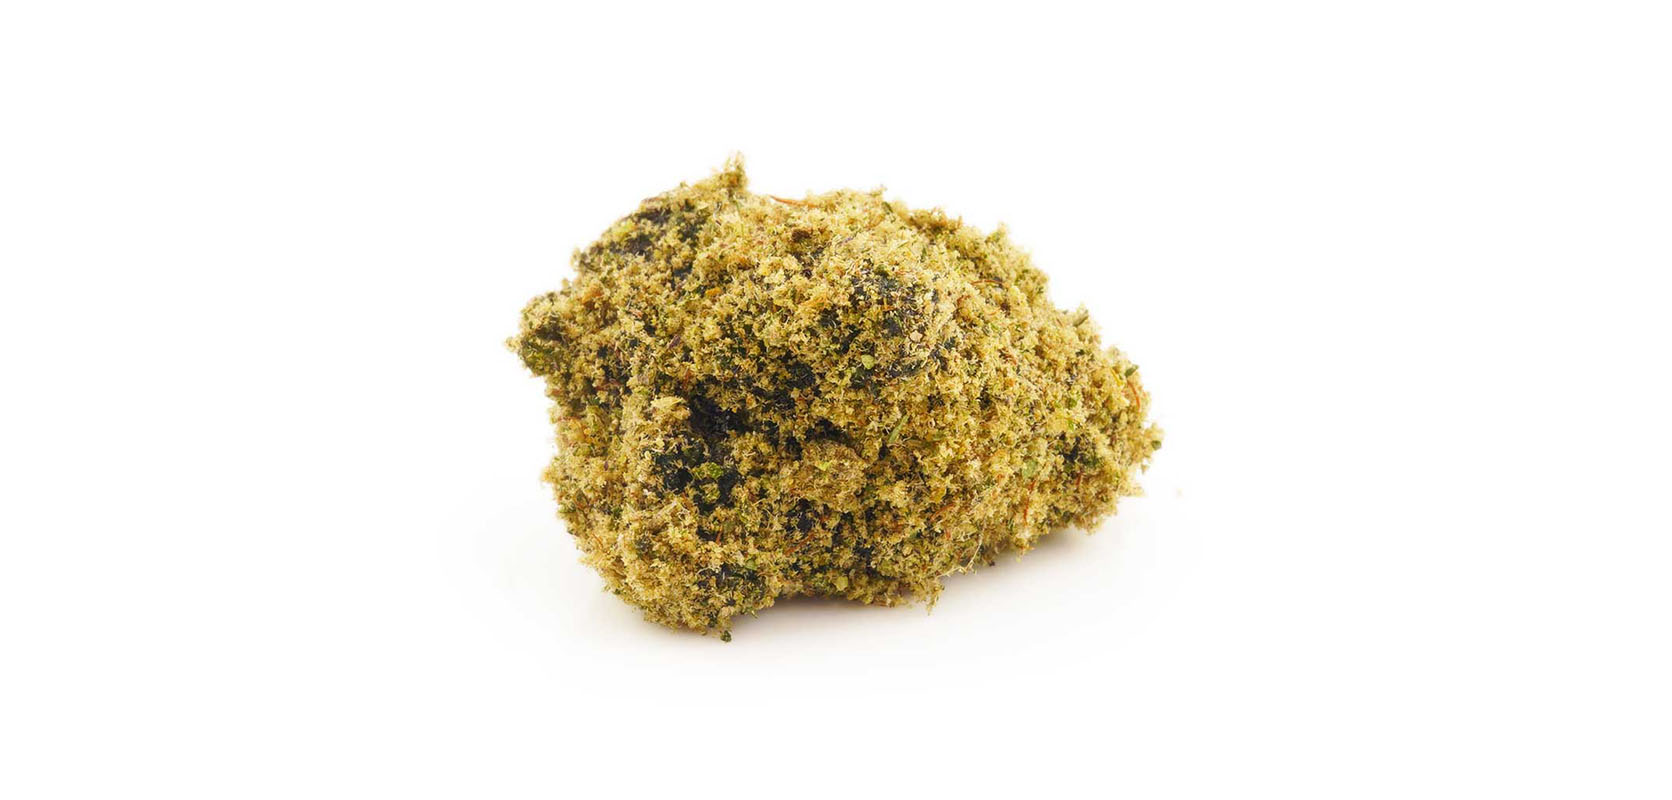 Moon Rock Weed budget buds at online dispensary Canada.